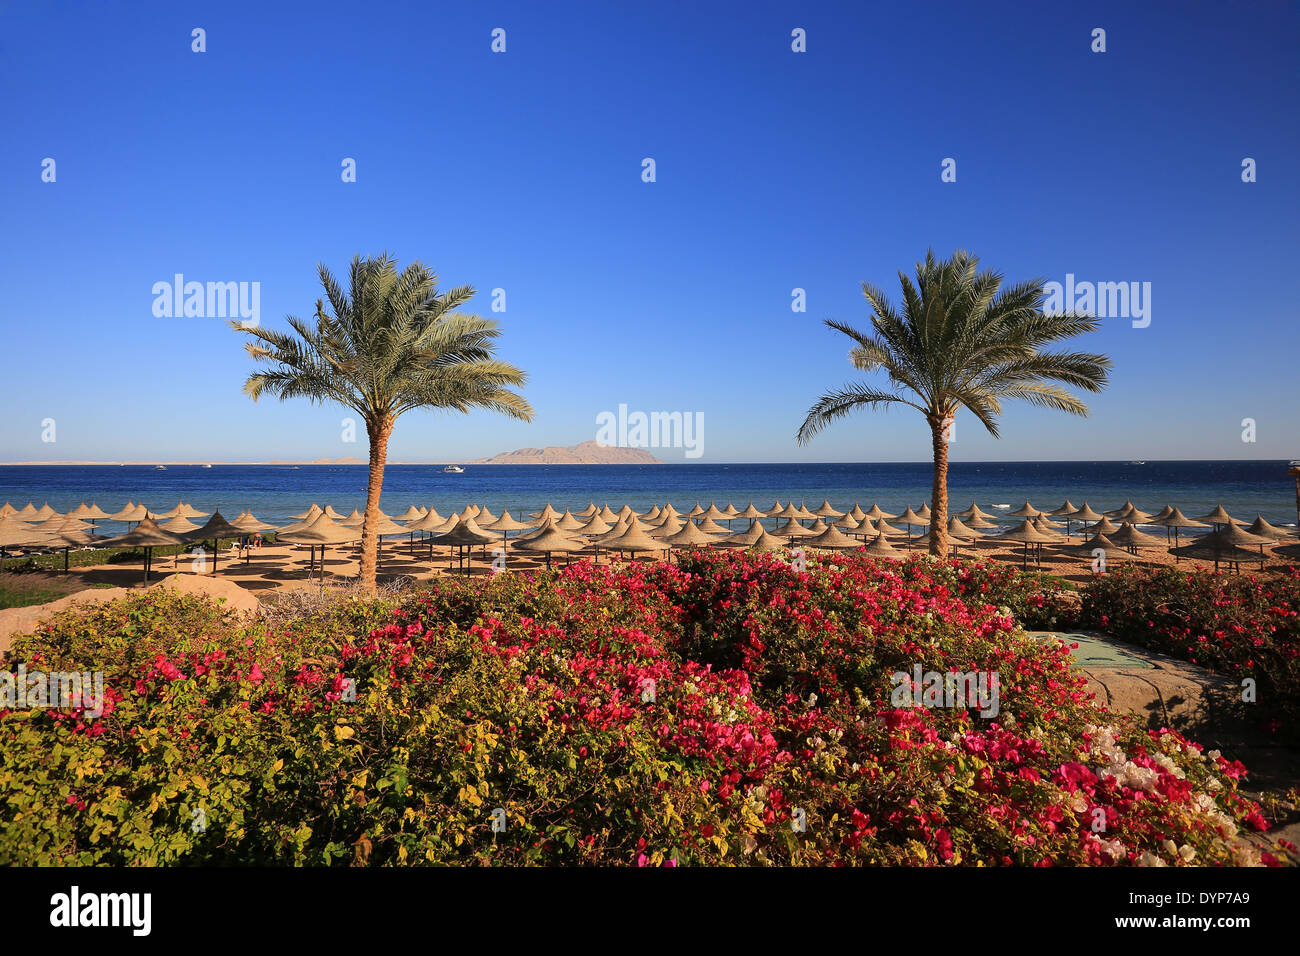 Beach in the resort of Sharm El Sheikh in Egypt Stock Photo